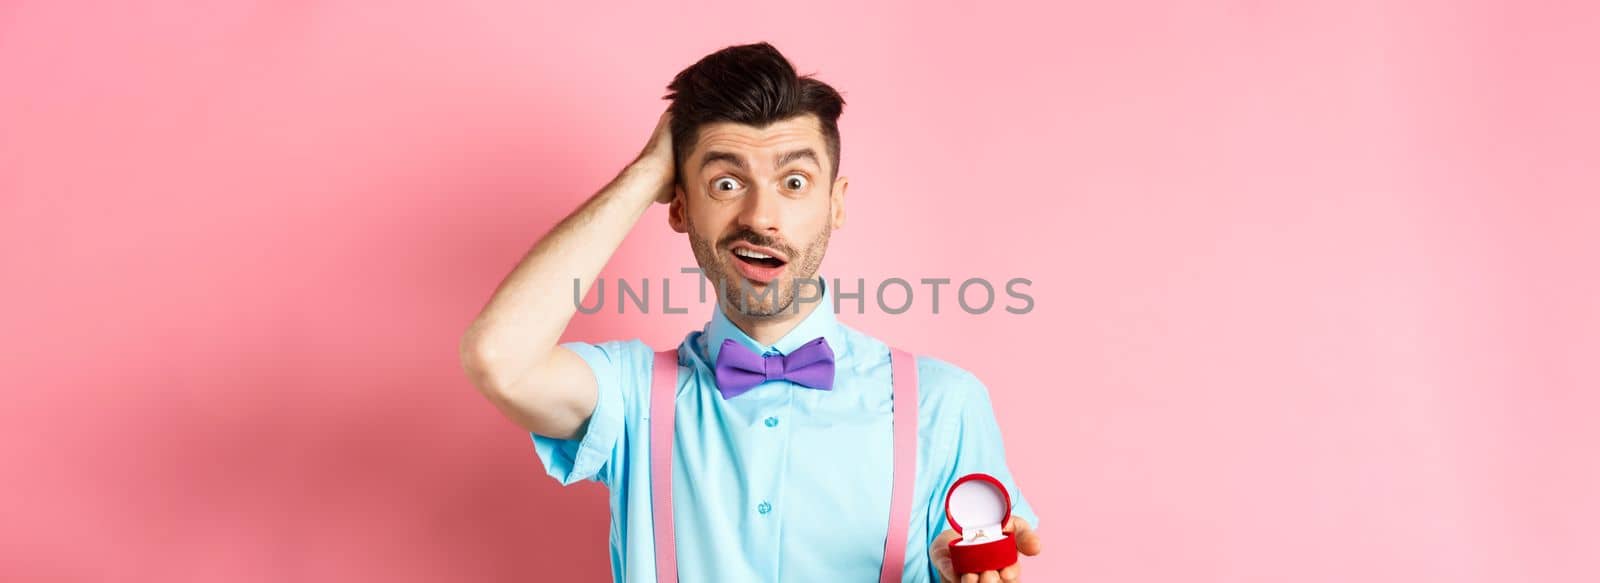 Valentines day. Confused funny guy standing with engagement ring, scratching head with unsure face, dont know what say, making proposal, standing over pink background.